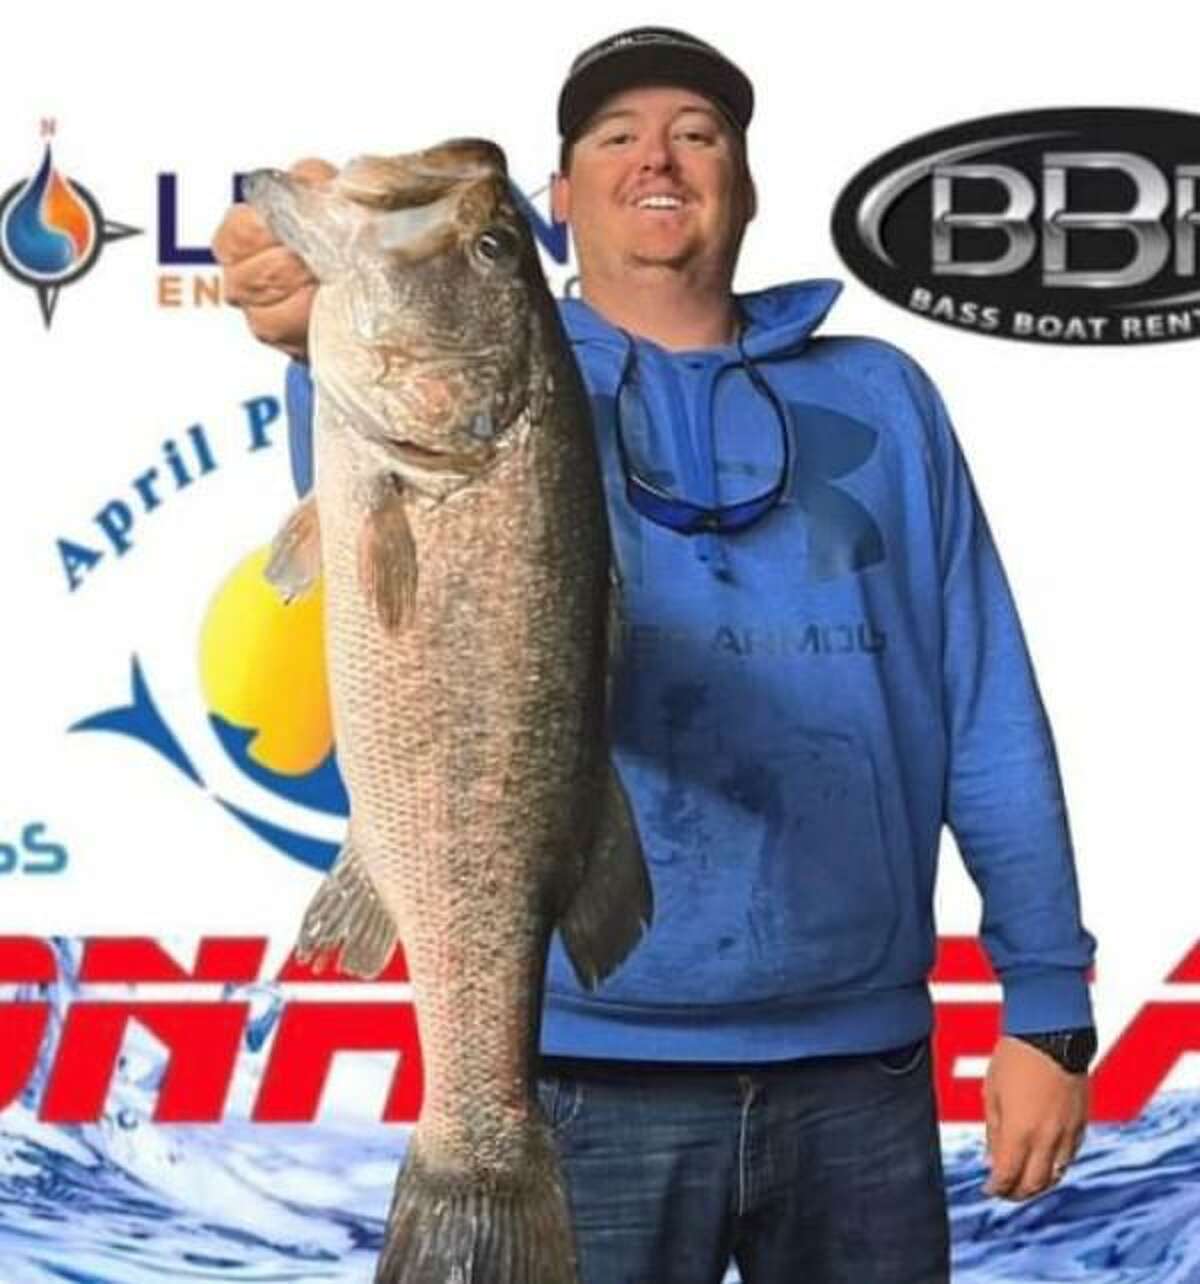 Travis Signorin won first place in the CONROEBASS Thursday Big Bass Tournament with a bass weight of 5.81 pounds.